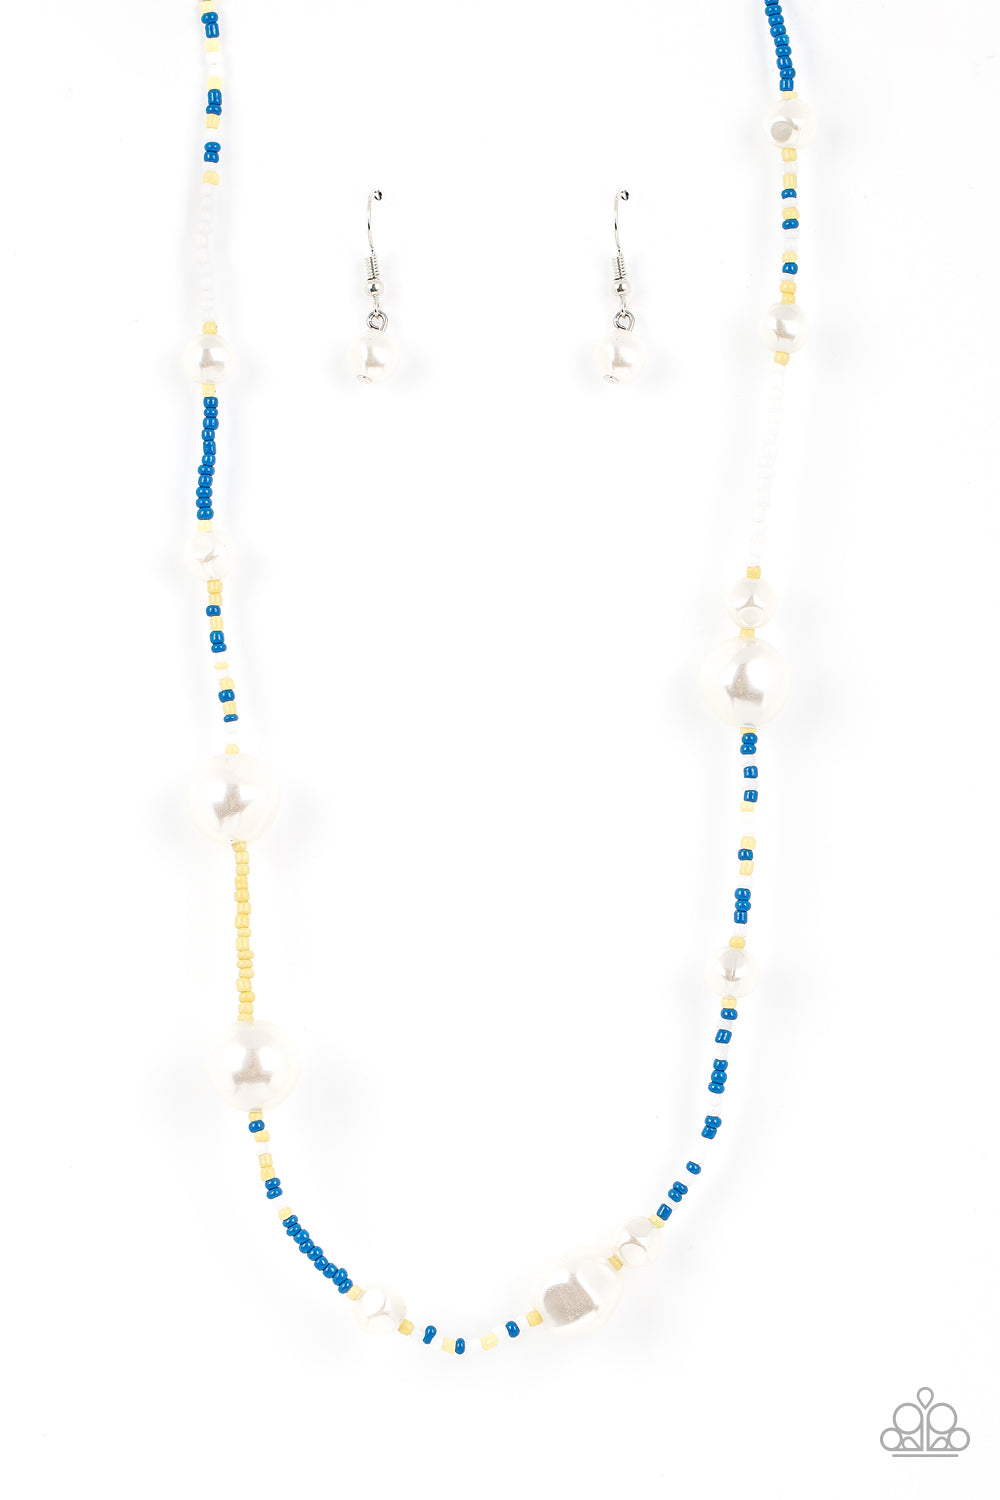 Modern Marina - Blue Seedbead Necklaces irregular-shaped pearls in varying sizes are scattered amongst blue, yellow, and white seed beads that are threaded along a wire, resulting in a refreshing and playful style below the collar.  Sold as one individual necklace. Includes one pair of matching earrings.  Get The Complete Look! Bracelet: "Contemporary Coastline - Blue" (Sold Separately)